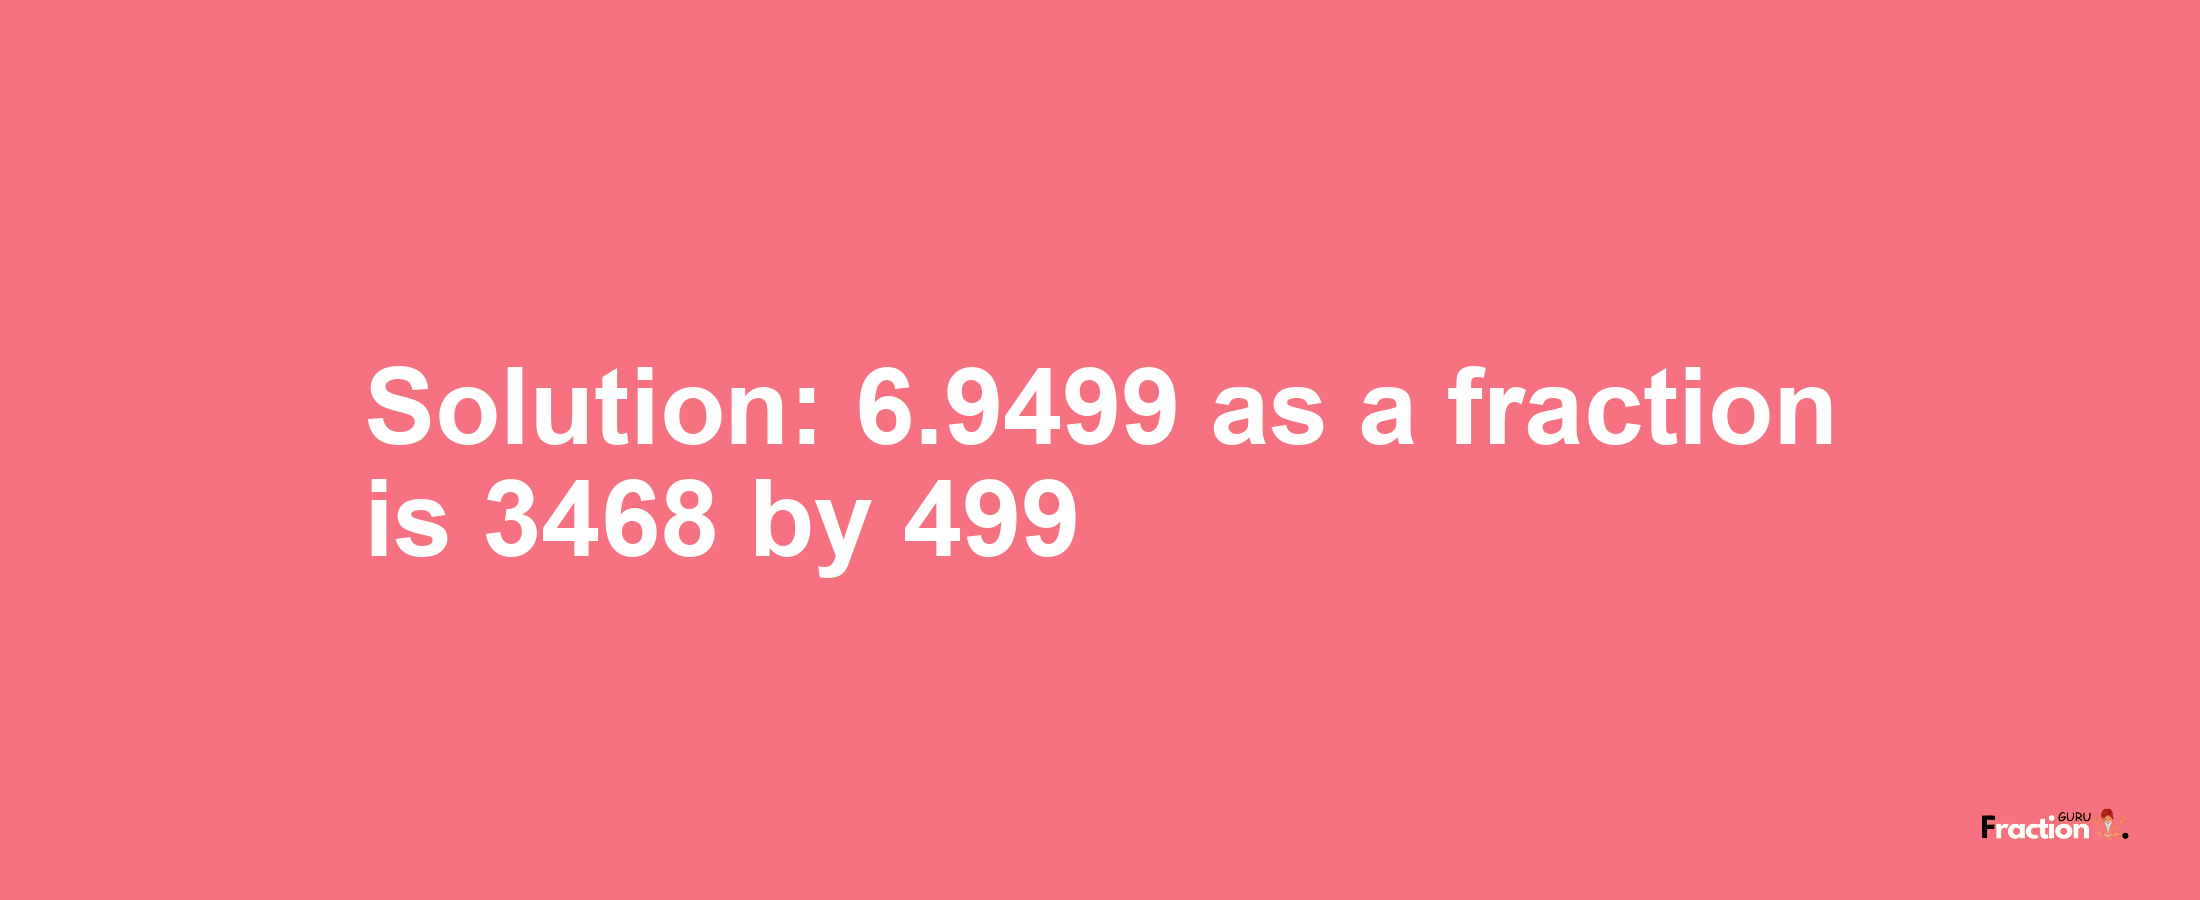 Solution:6.9499 as a fraction is 3468/499